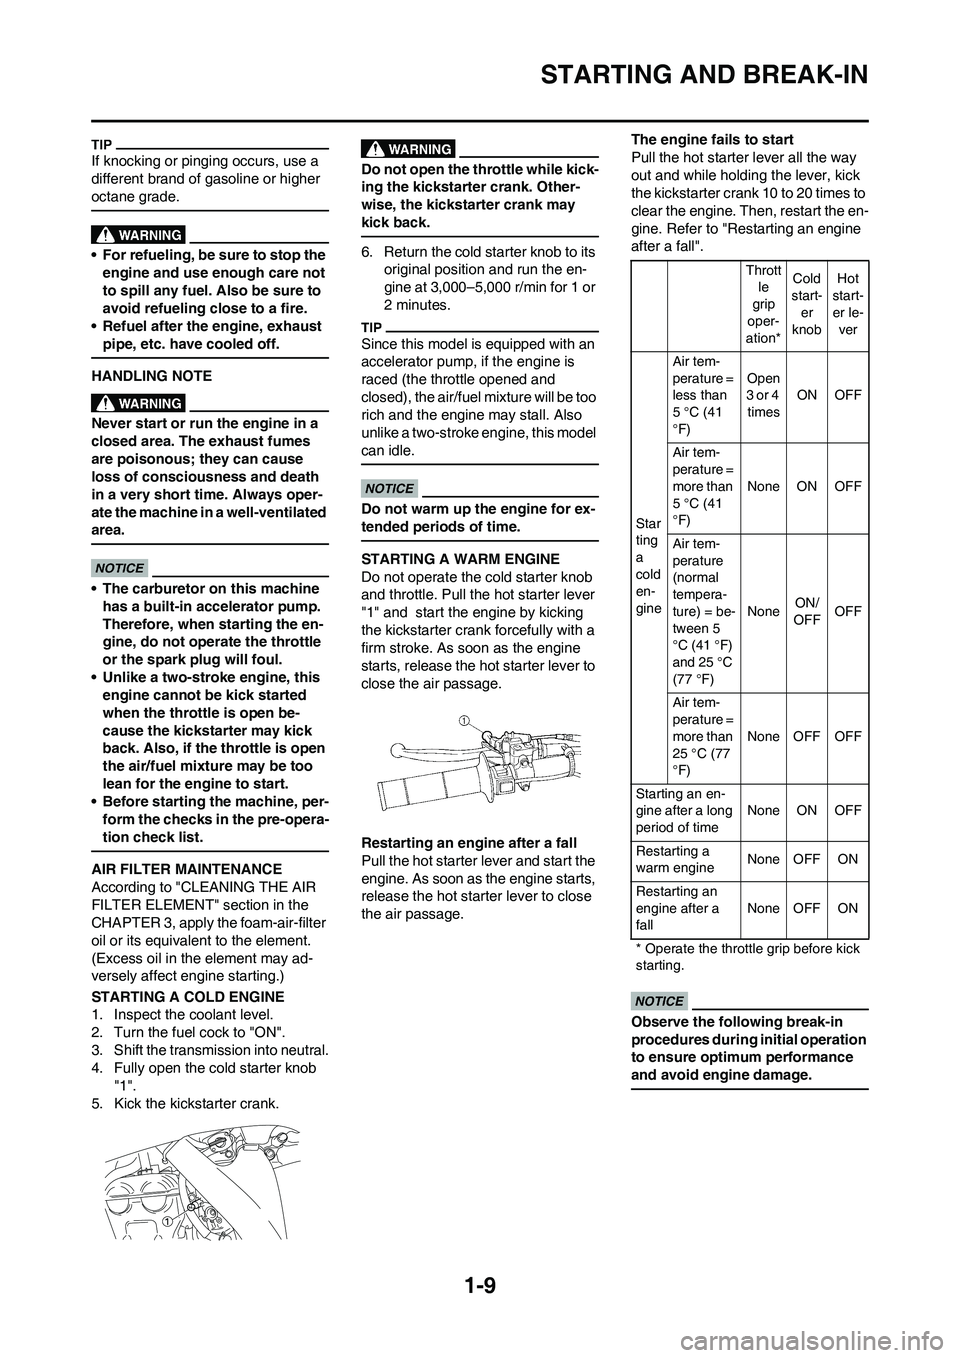 YAMAHA YZ450F 2009  Owners Manual 1-9
STARTING AND BREAK-IN
If knocking or pinging occurs, use a 
different brand of gasoline or higher 
octane grade.
• For refueling, be sure to stop the 
engine and use enough care not 
to spill an